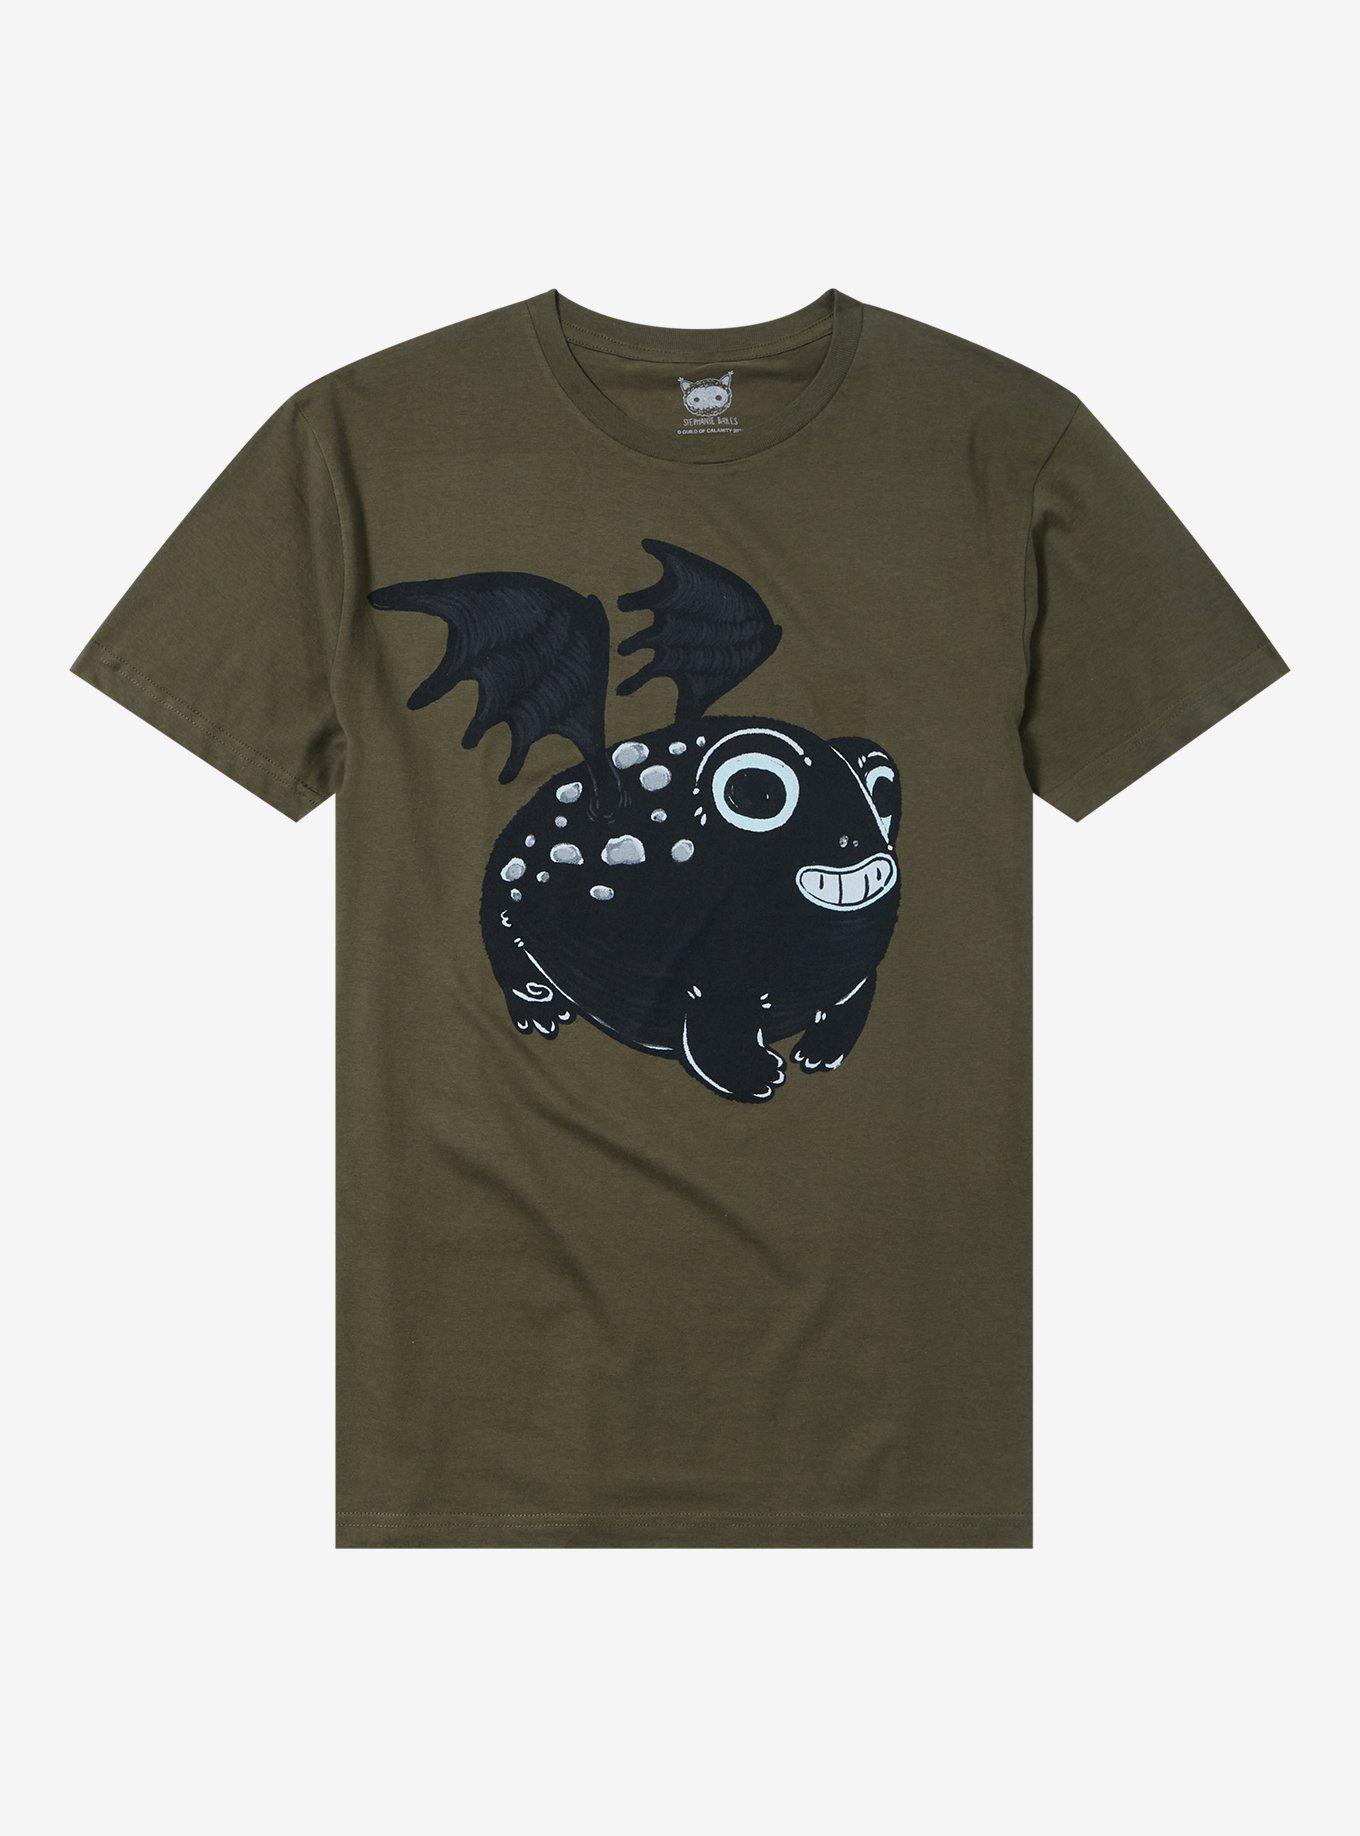 Winged Toad T-Shirt By Stephanie Bayles, GREEN, hi-res